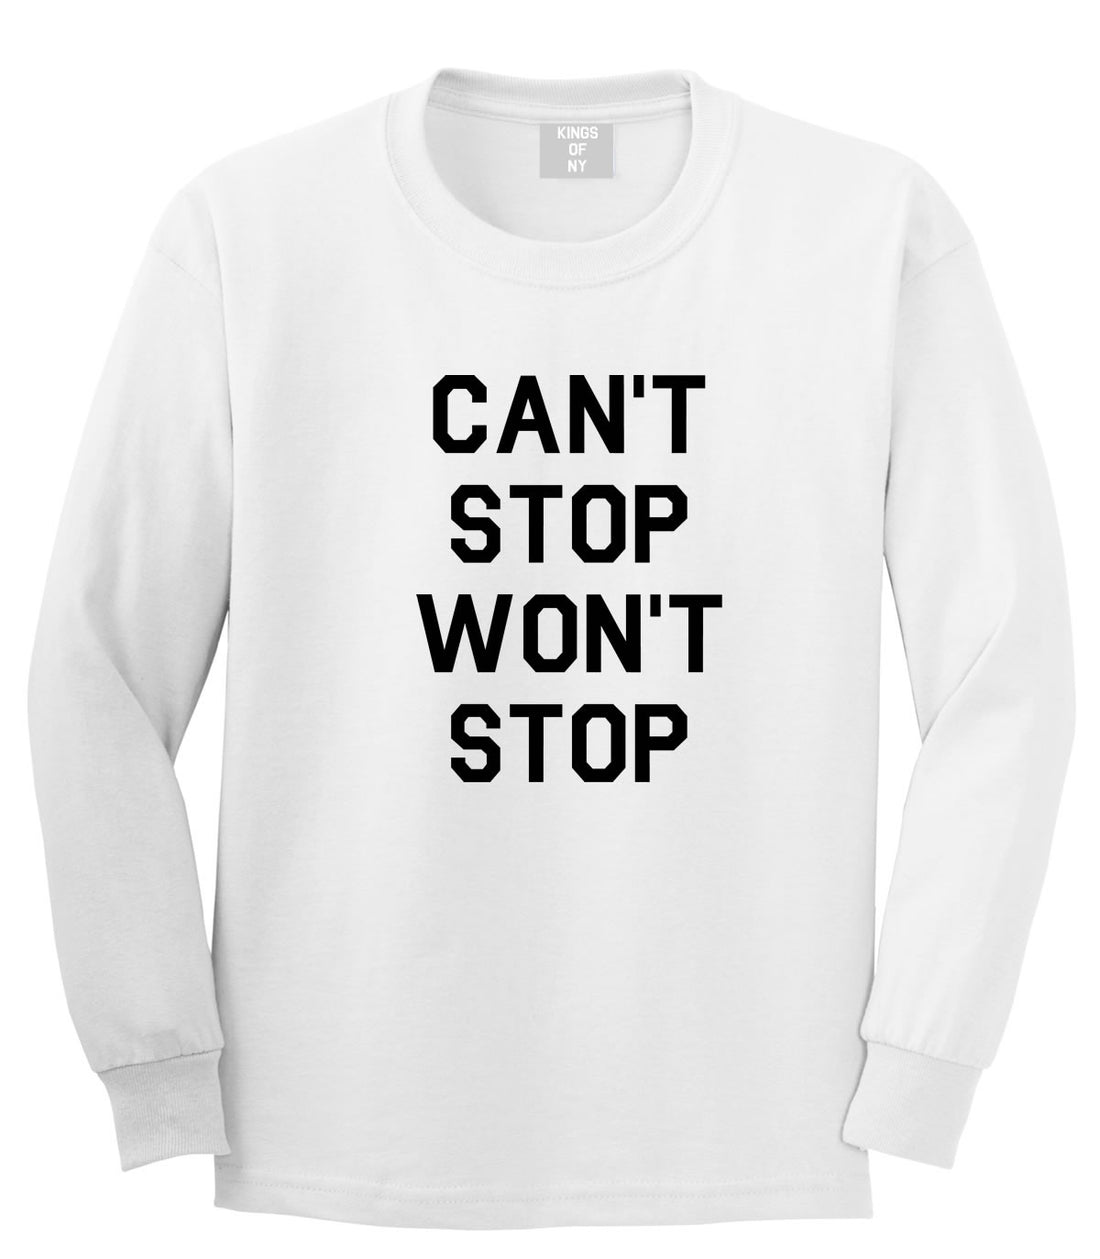  Kings Of NY Cant Stop Wont Stop Long Sleeve T-Shirt in White